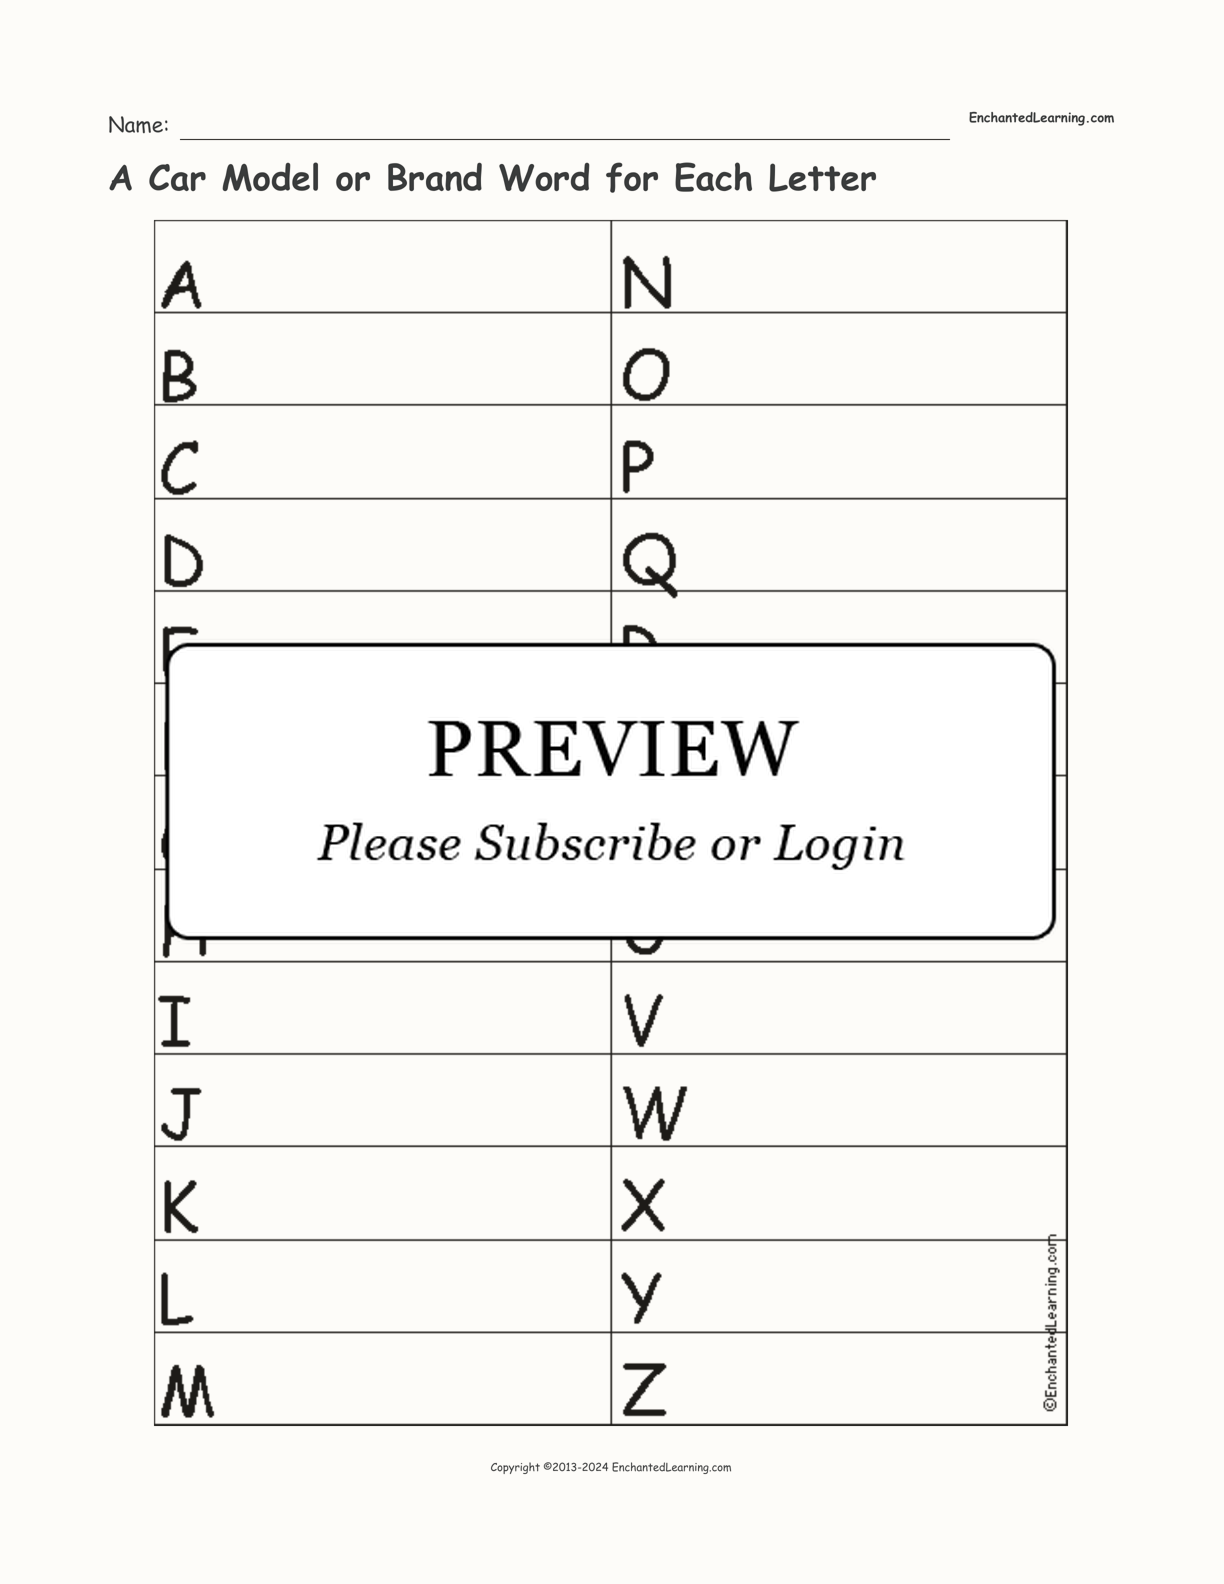 A Car Model or Brand Word for Each Letter interactive worksheet page 1